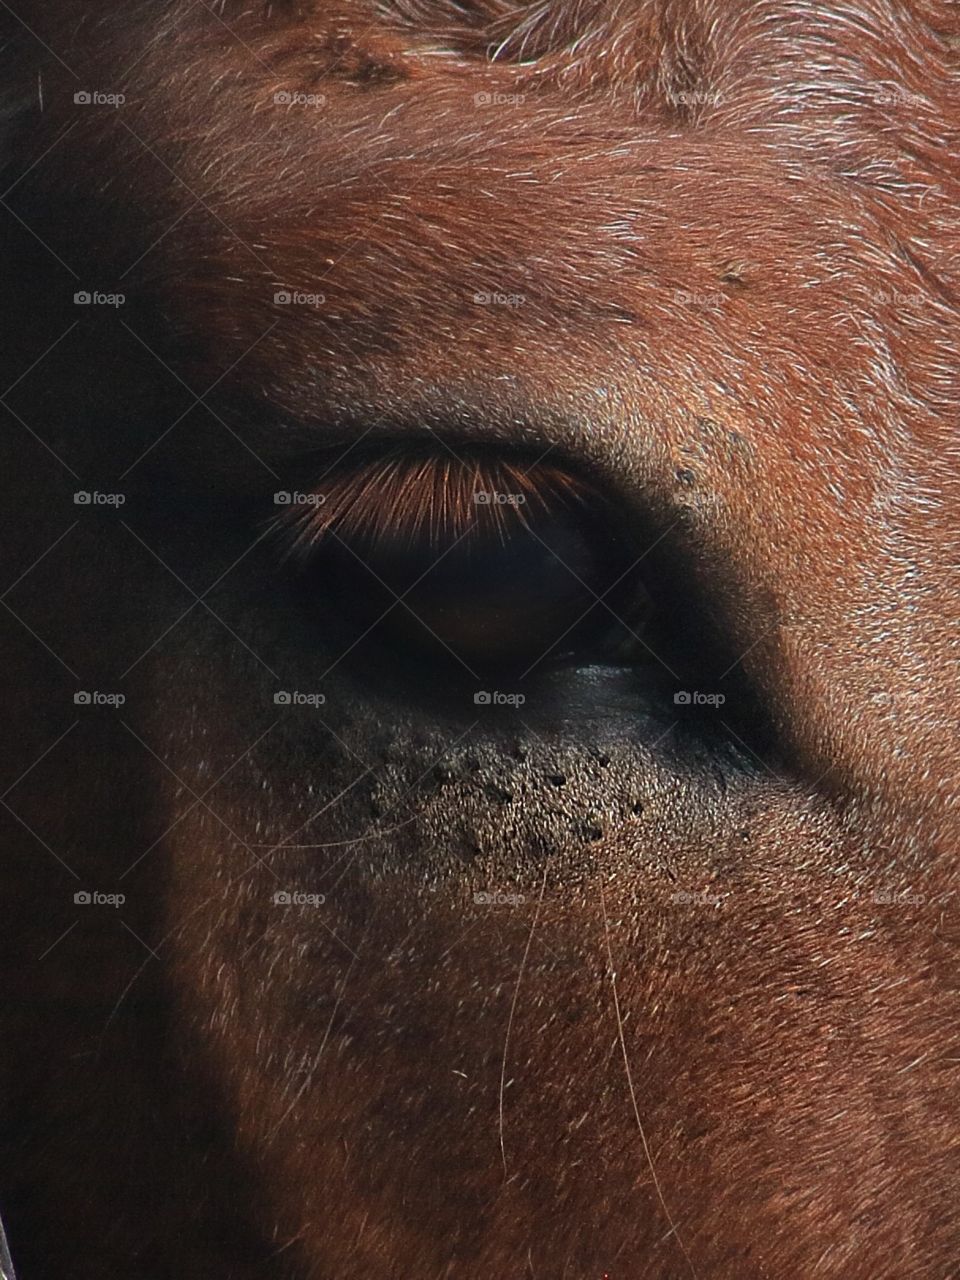 close up of a horse's eye